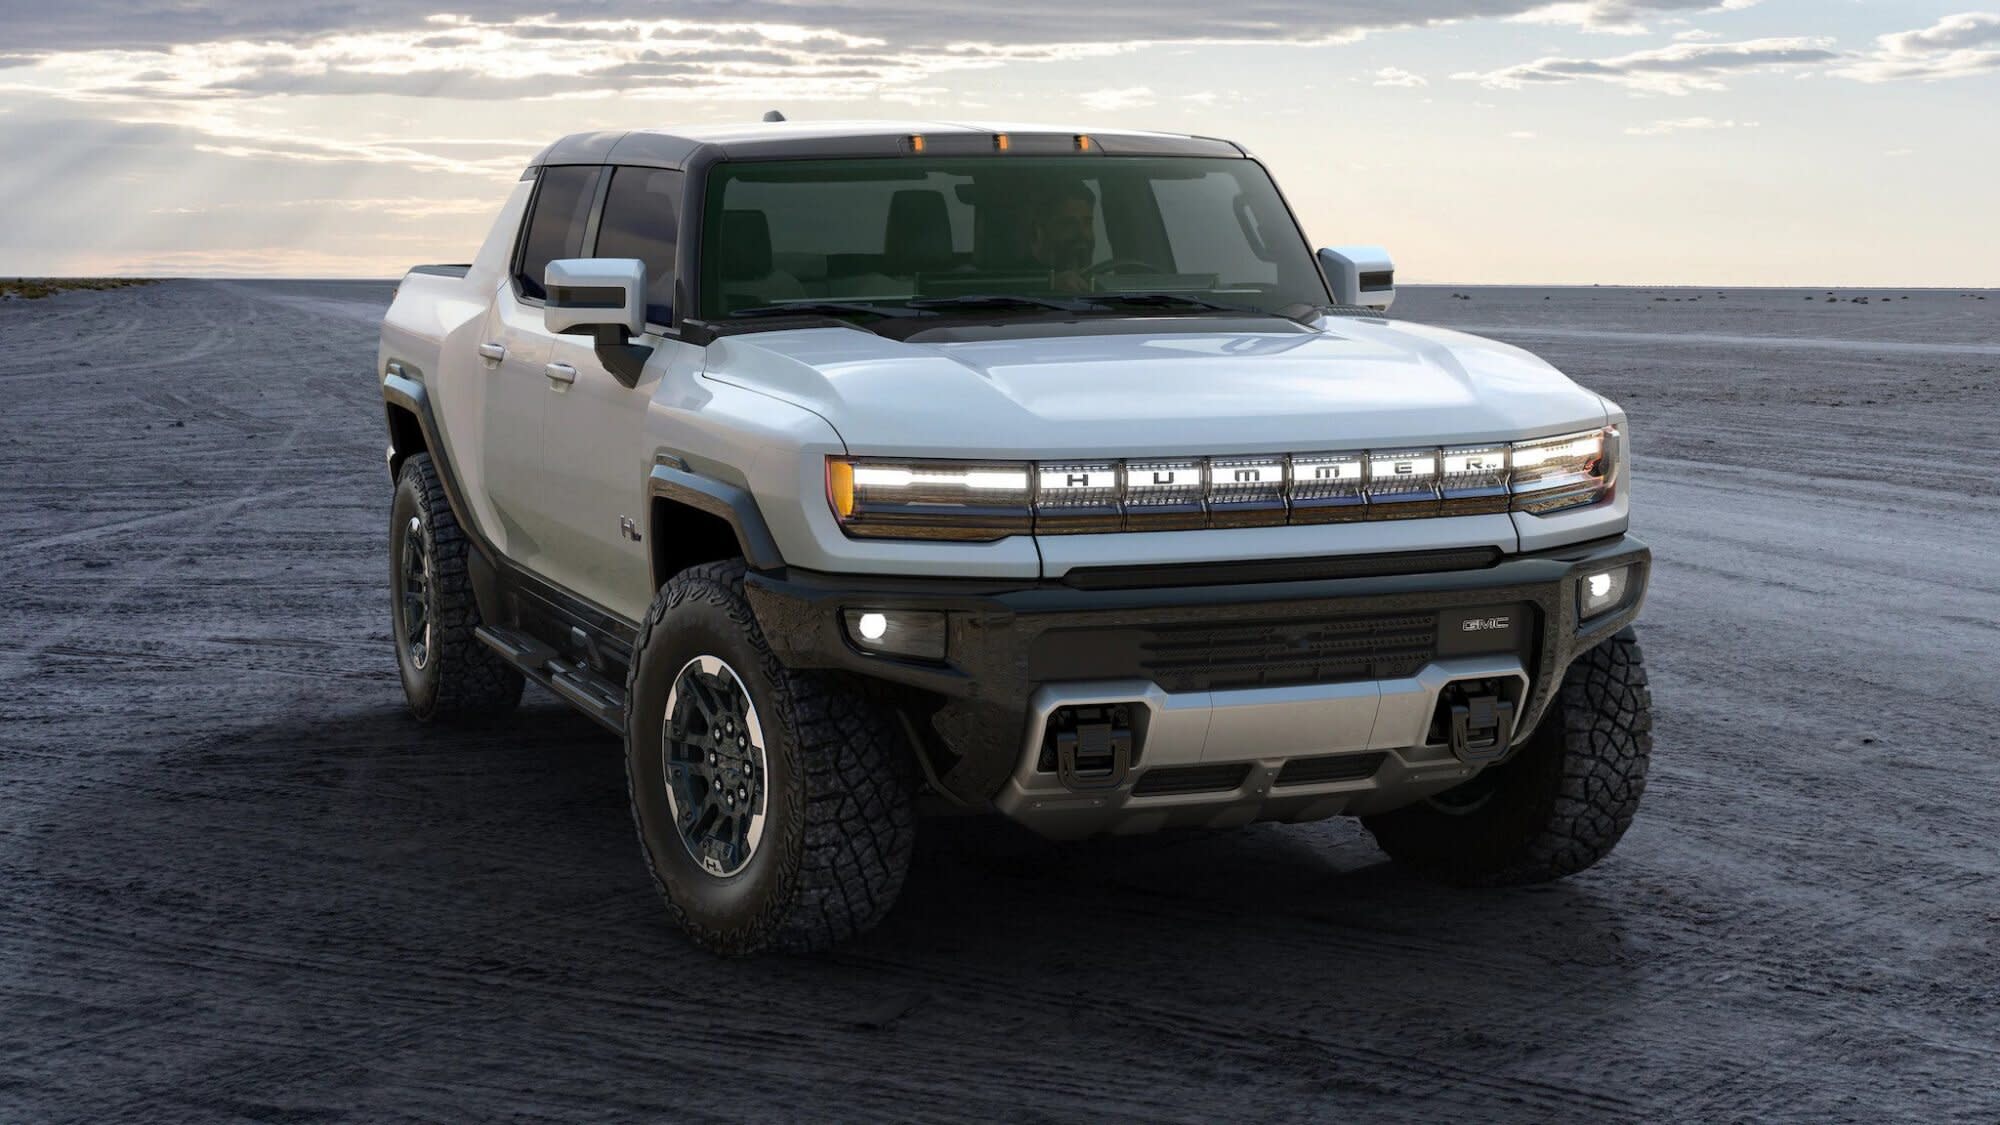 GM Brings Back the Hummer as a 1,000Horsepower Electric Vehicle With a